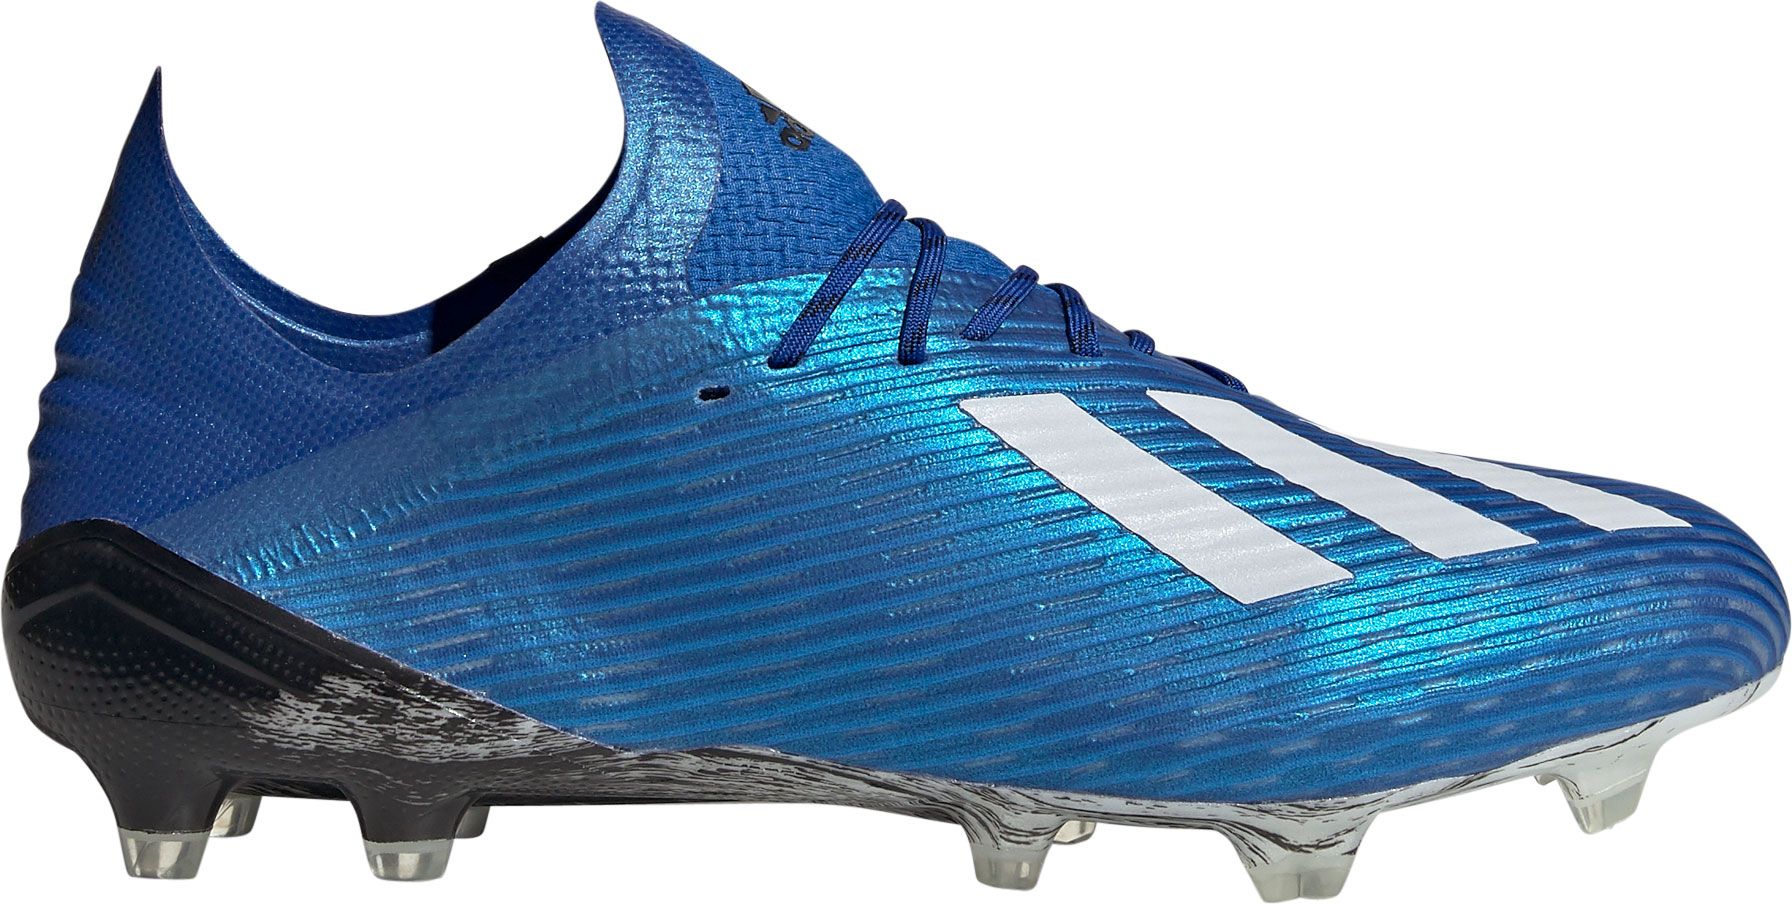 adidas blue soccer boots